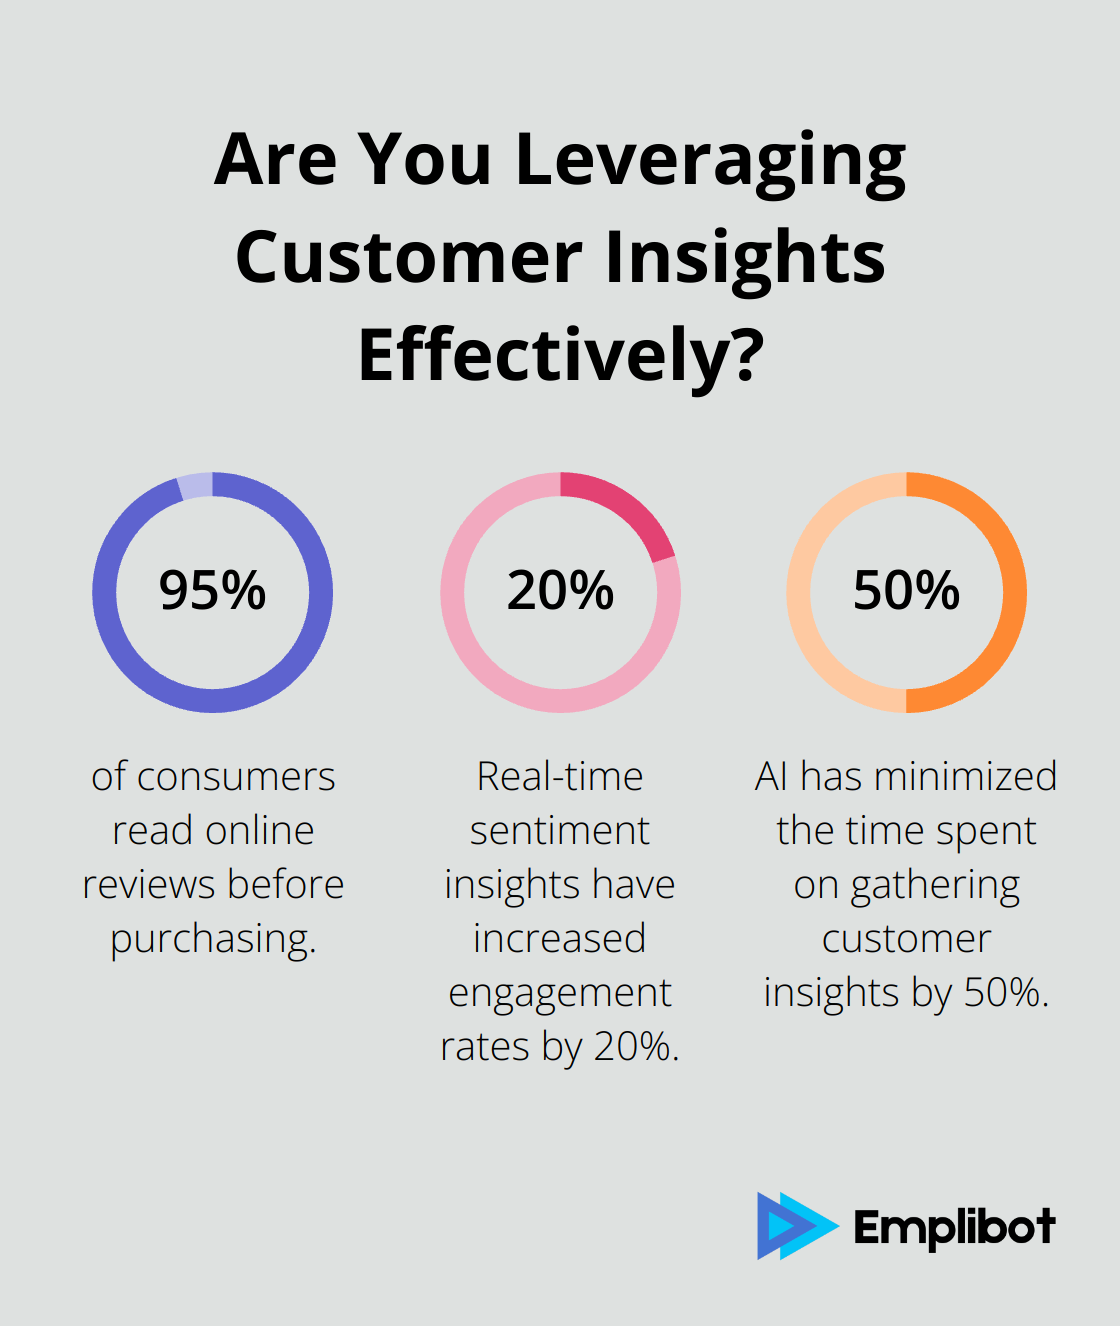 Fact - Are You Leveraging Customer Insights Effectively?